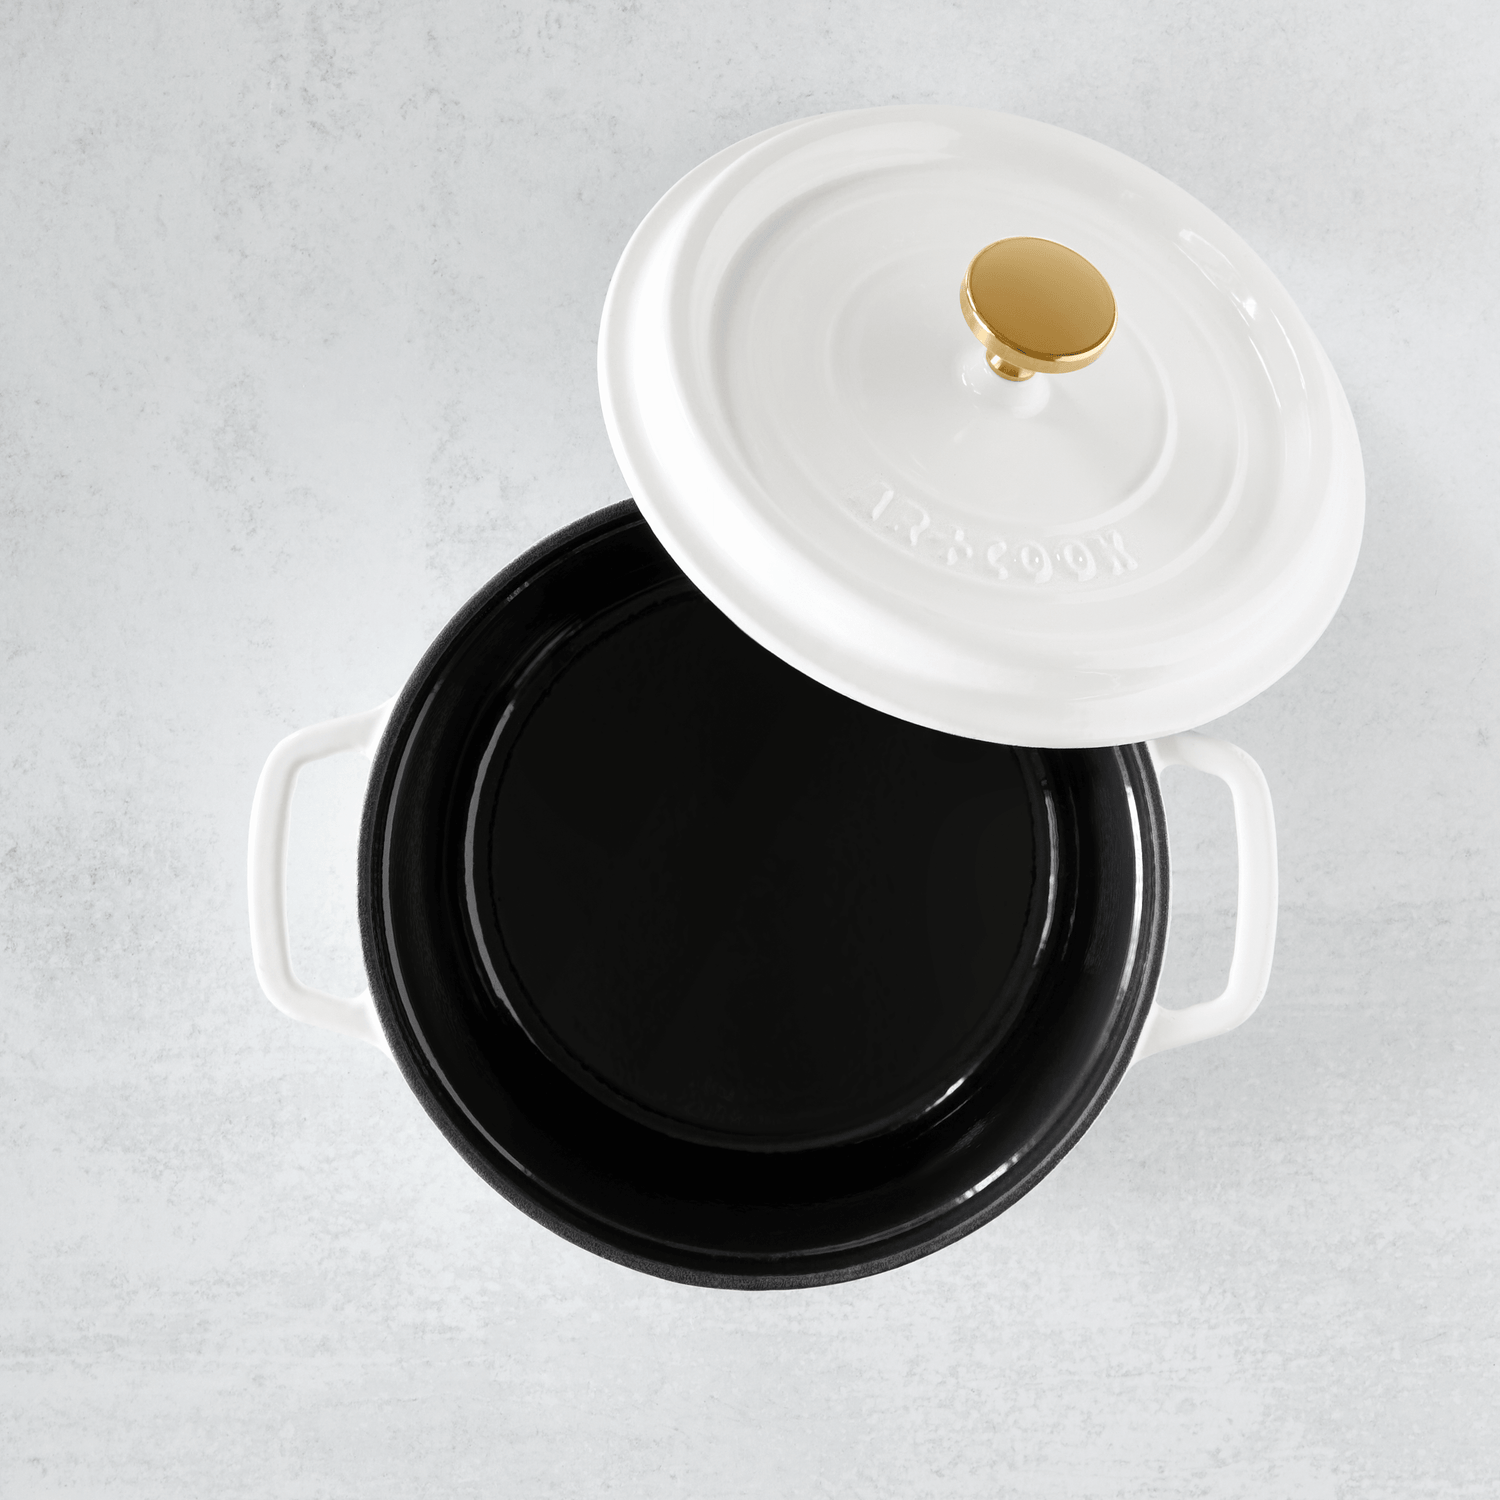 The Classic Dutch Oven, Re-imagined. ✨ The NEW Instant® Precision